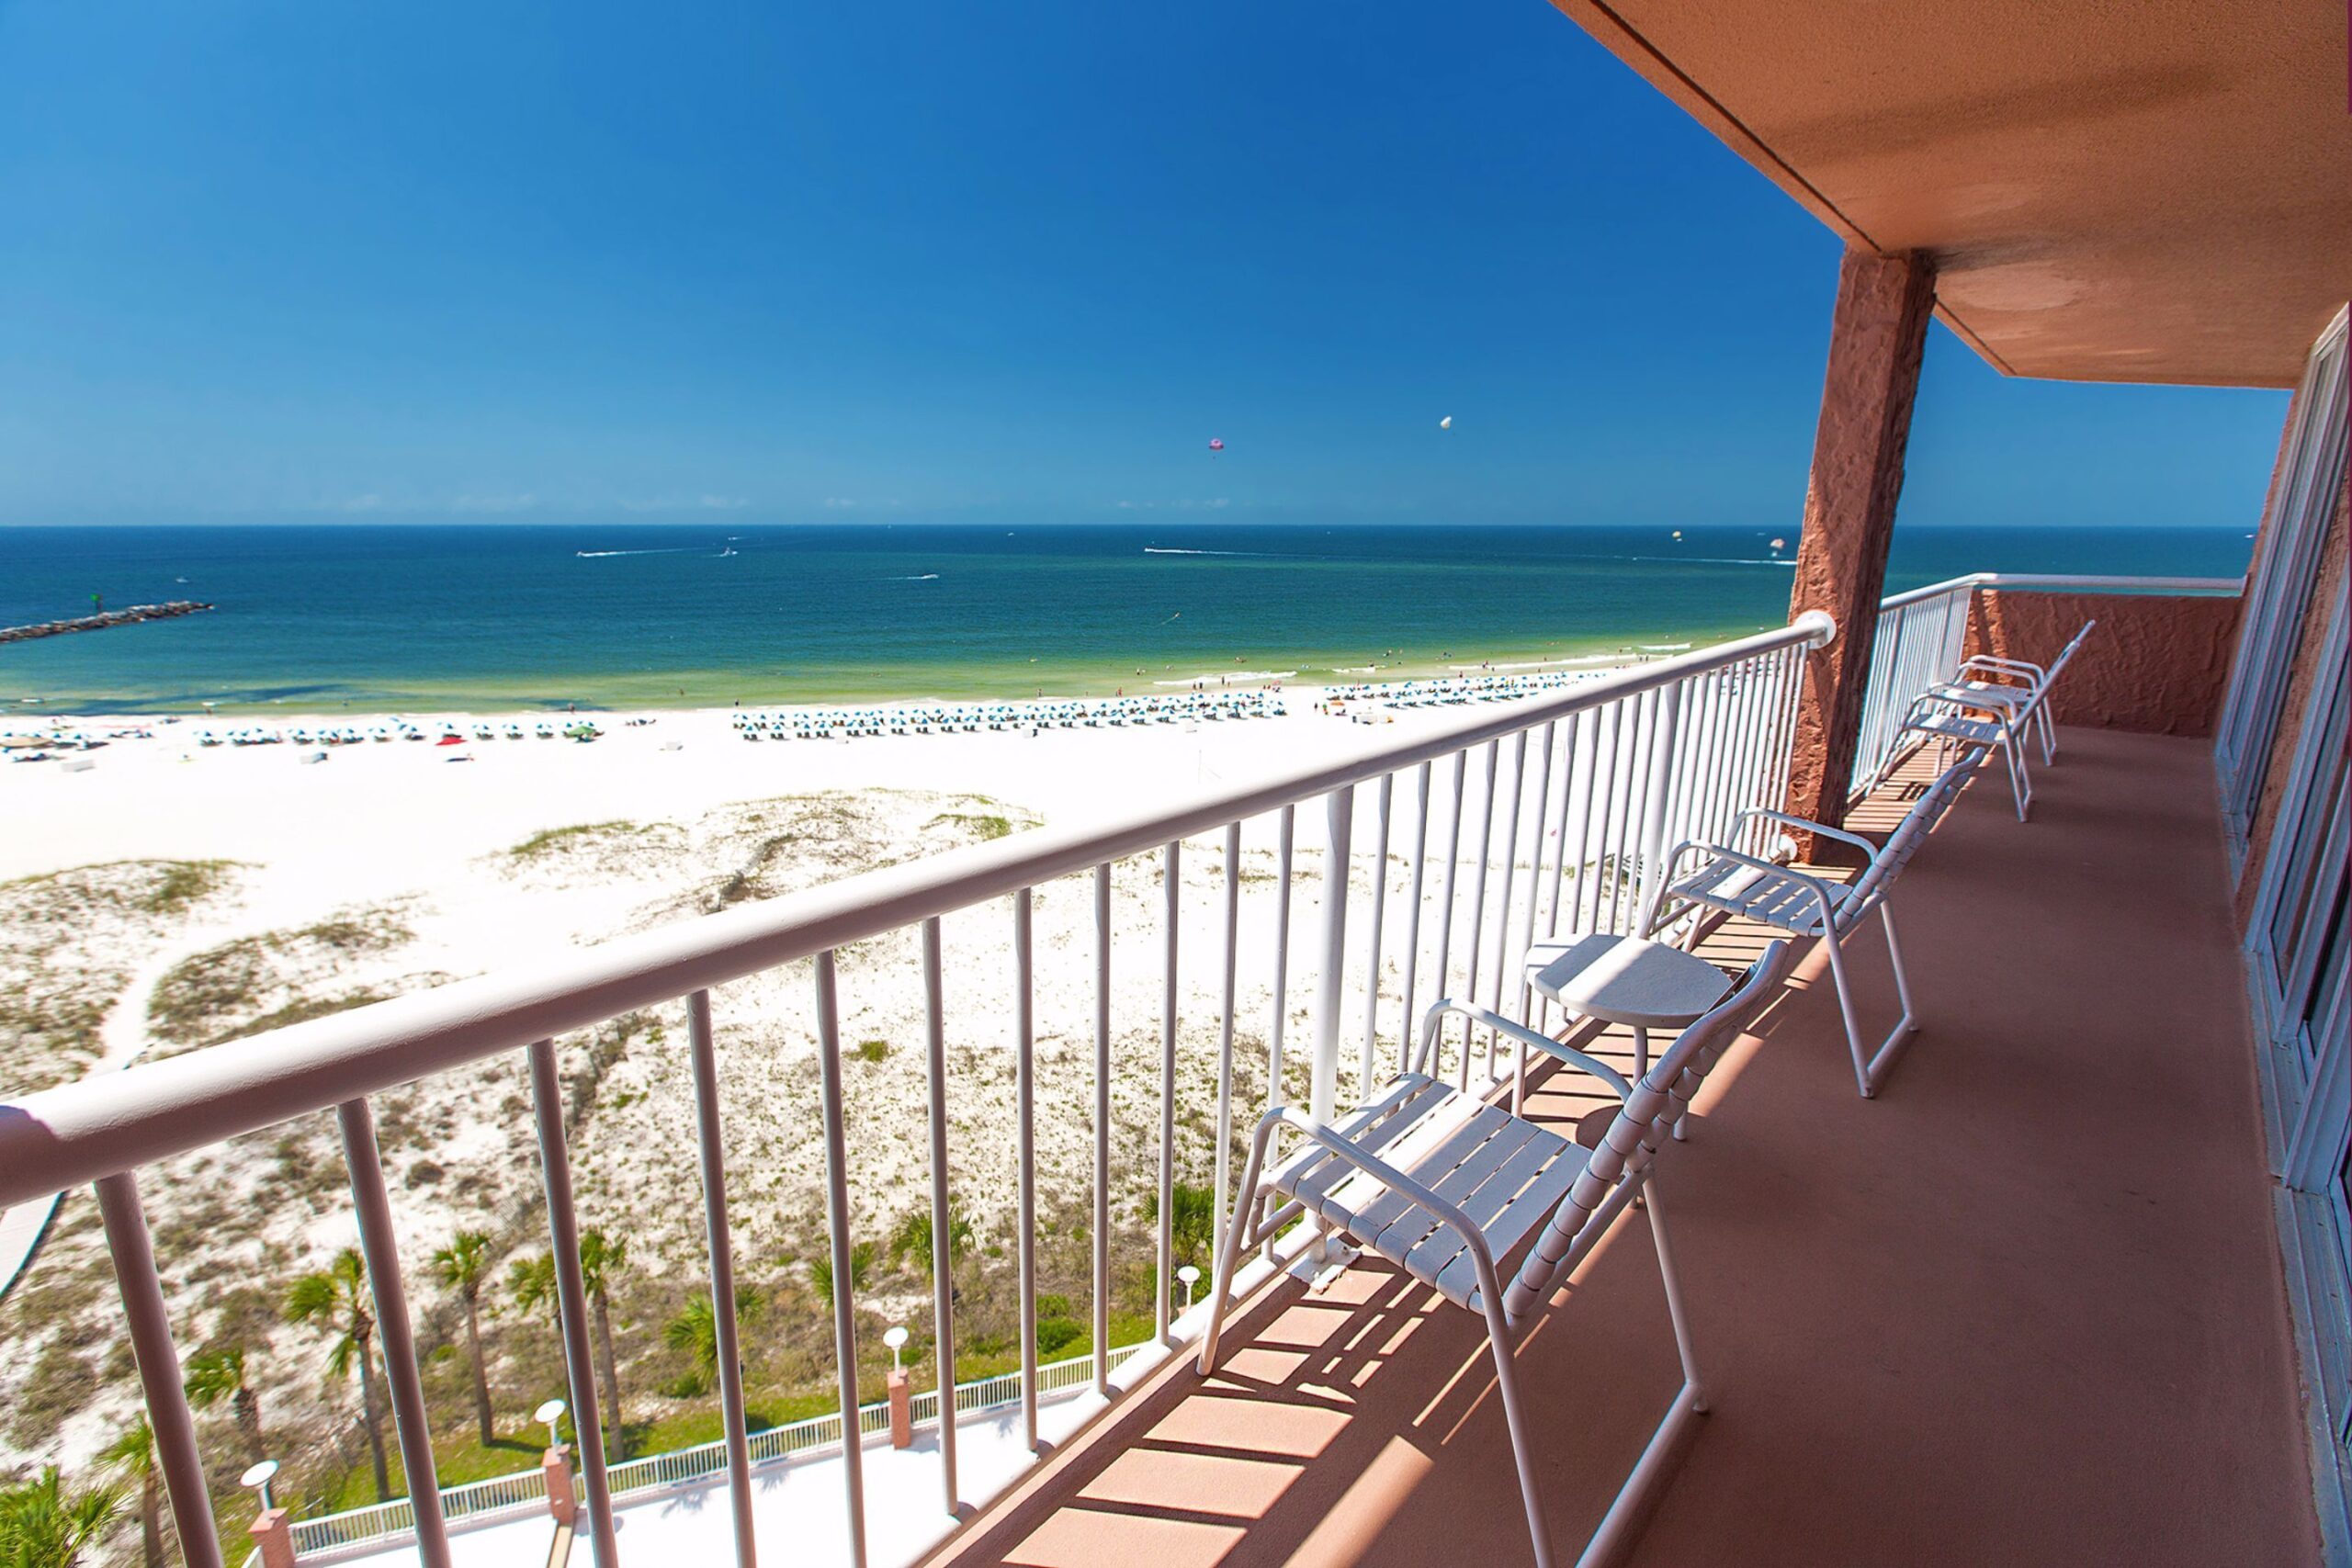 Discover the Beauty and Serenity of Perdido Beach Resort